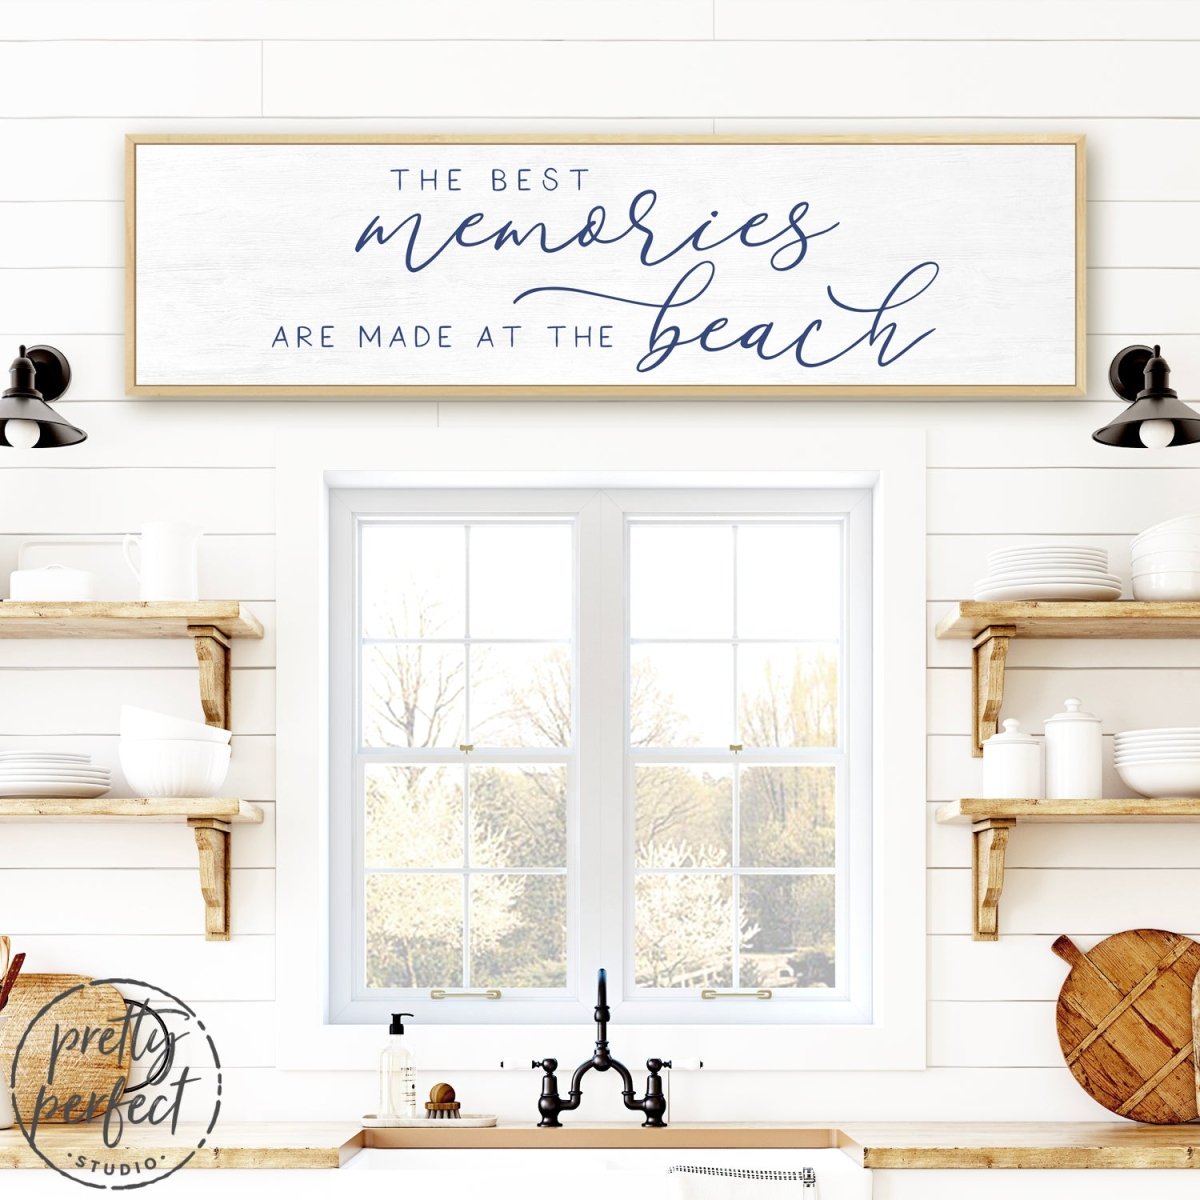 The Best Memories Are Made At The Beach Sign on Wall Above Kitchen Sink - Pretty Perfect Studio